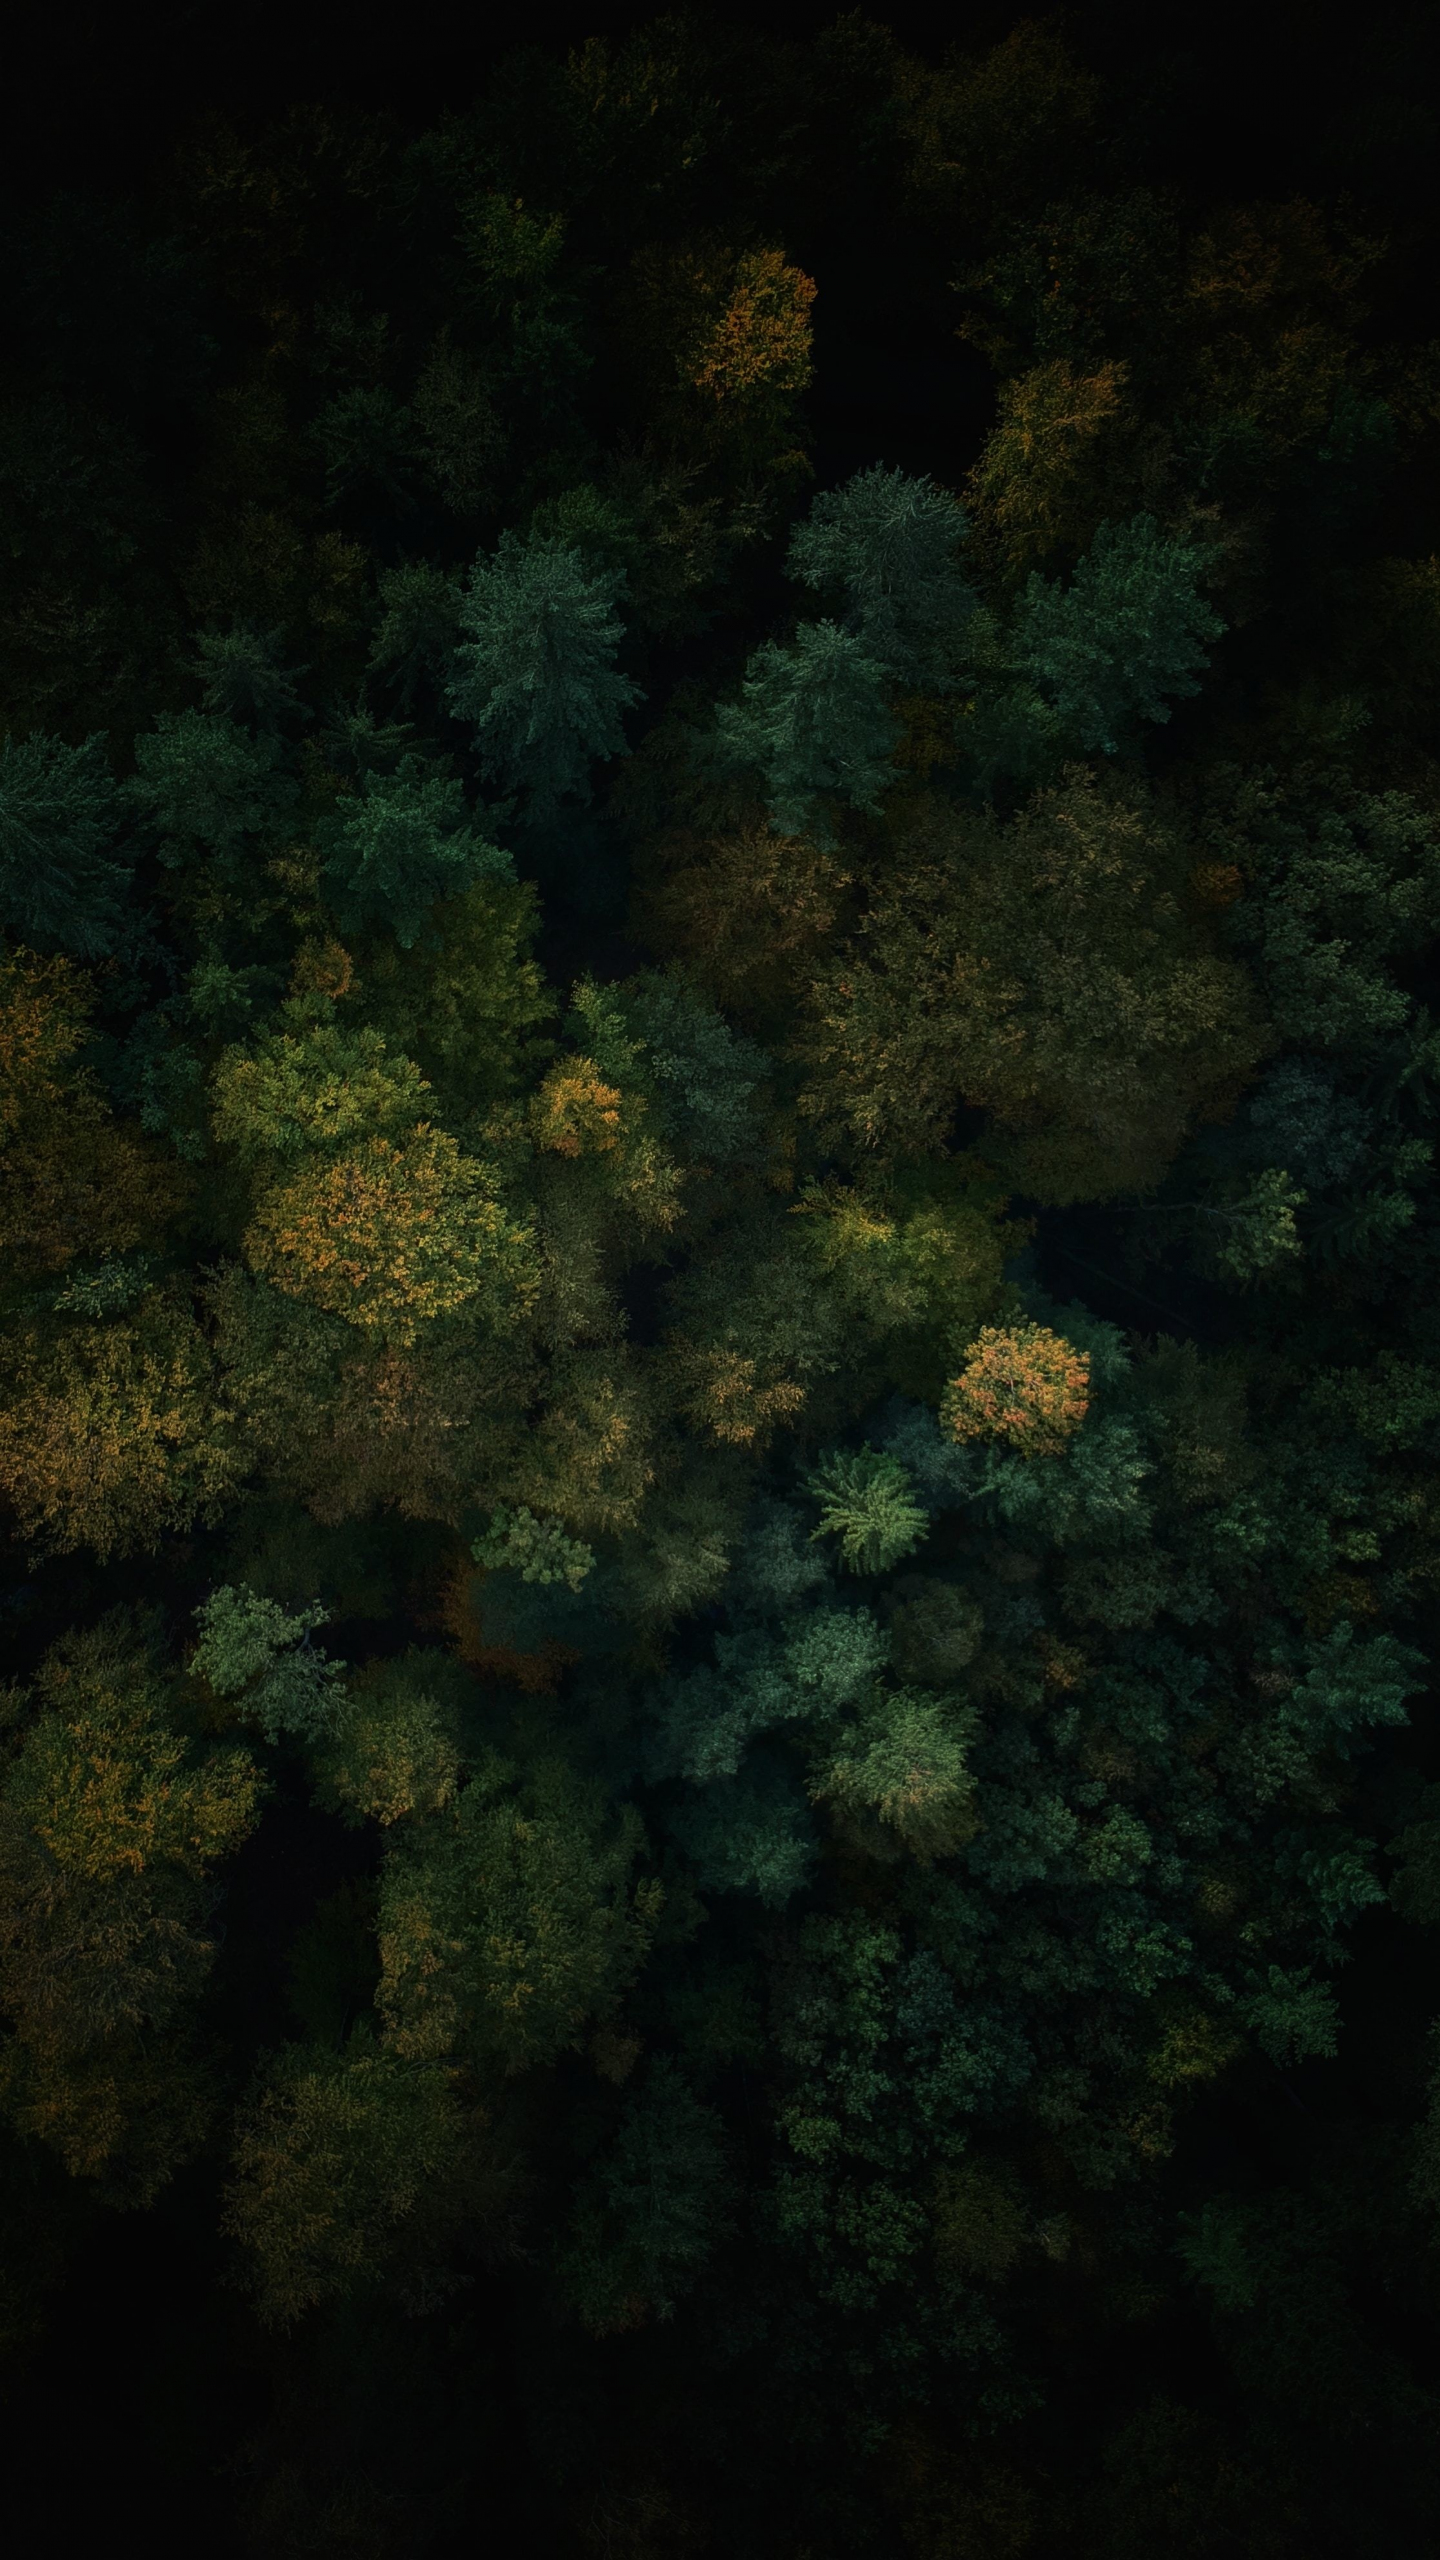 Download dense forest, green trees, nature, aerial view 1440x2560 wallpaper, qhd samsung galaxy s s edge, note, lg g 1440x2560 HD image, background, 23093